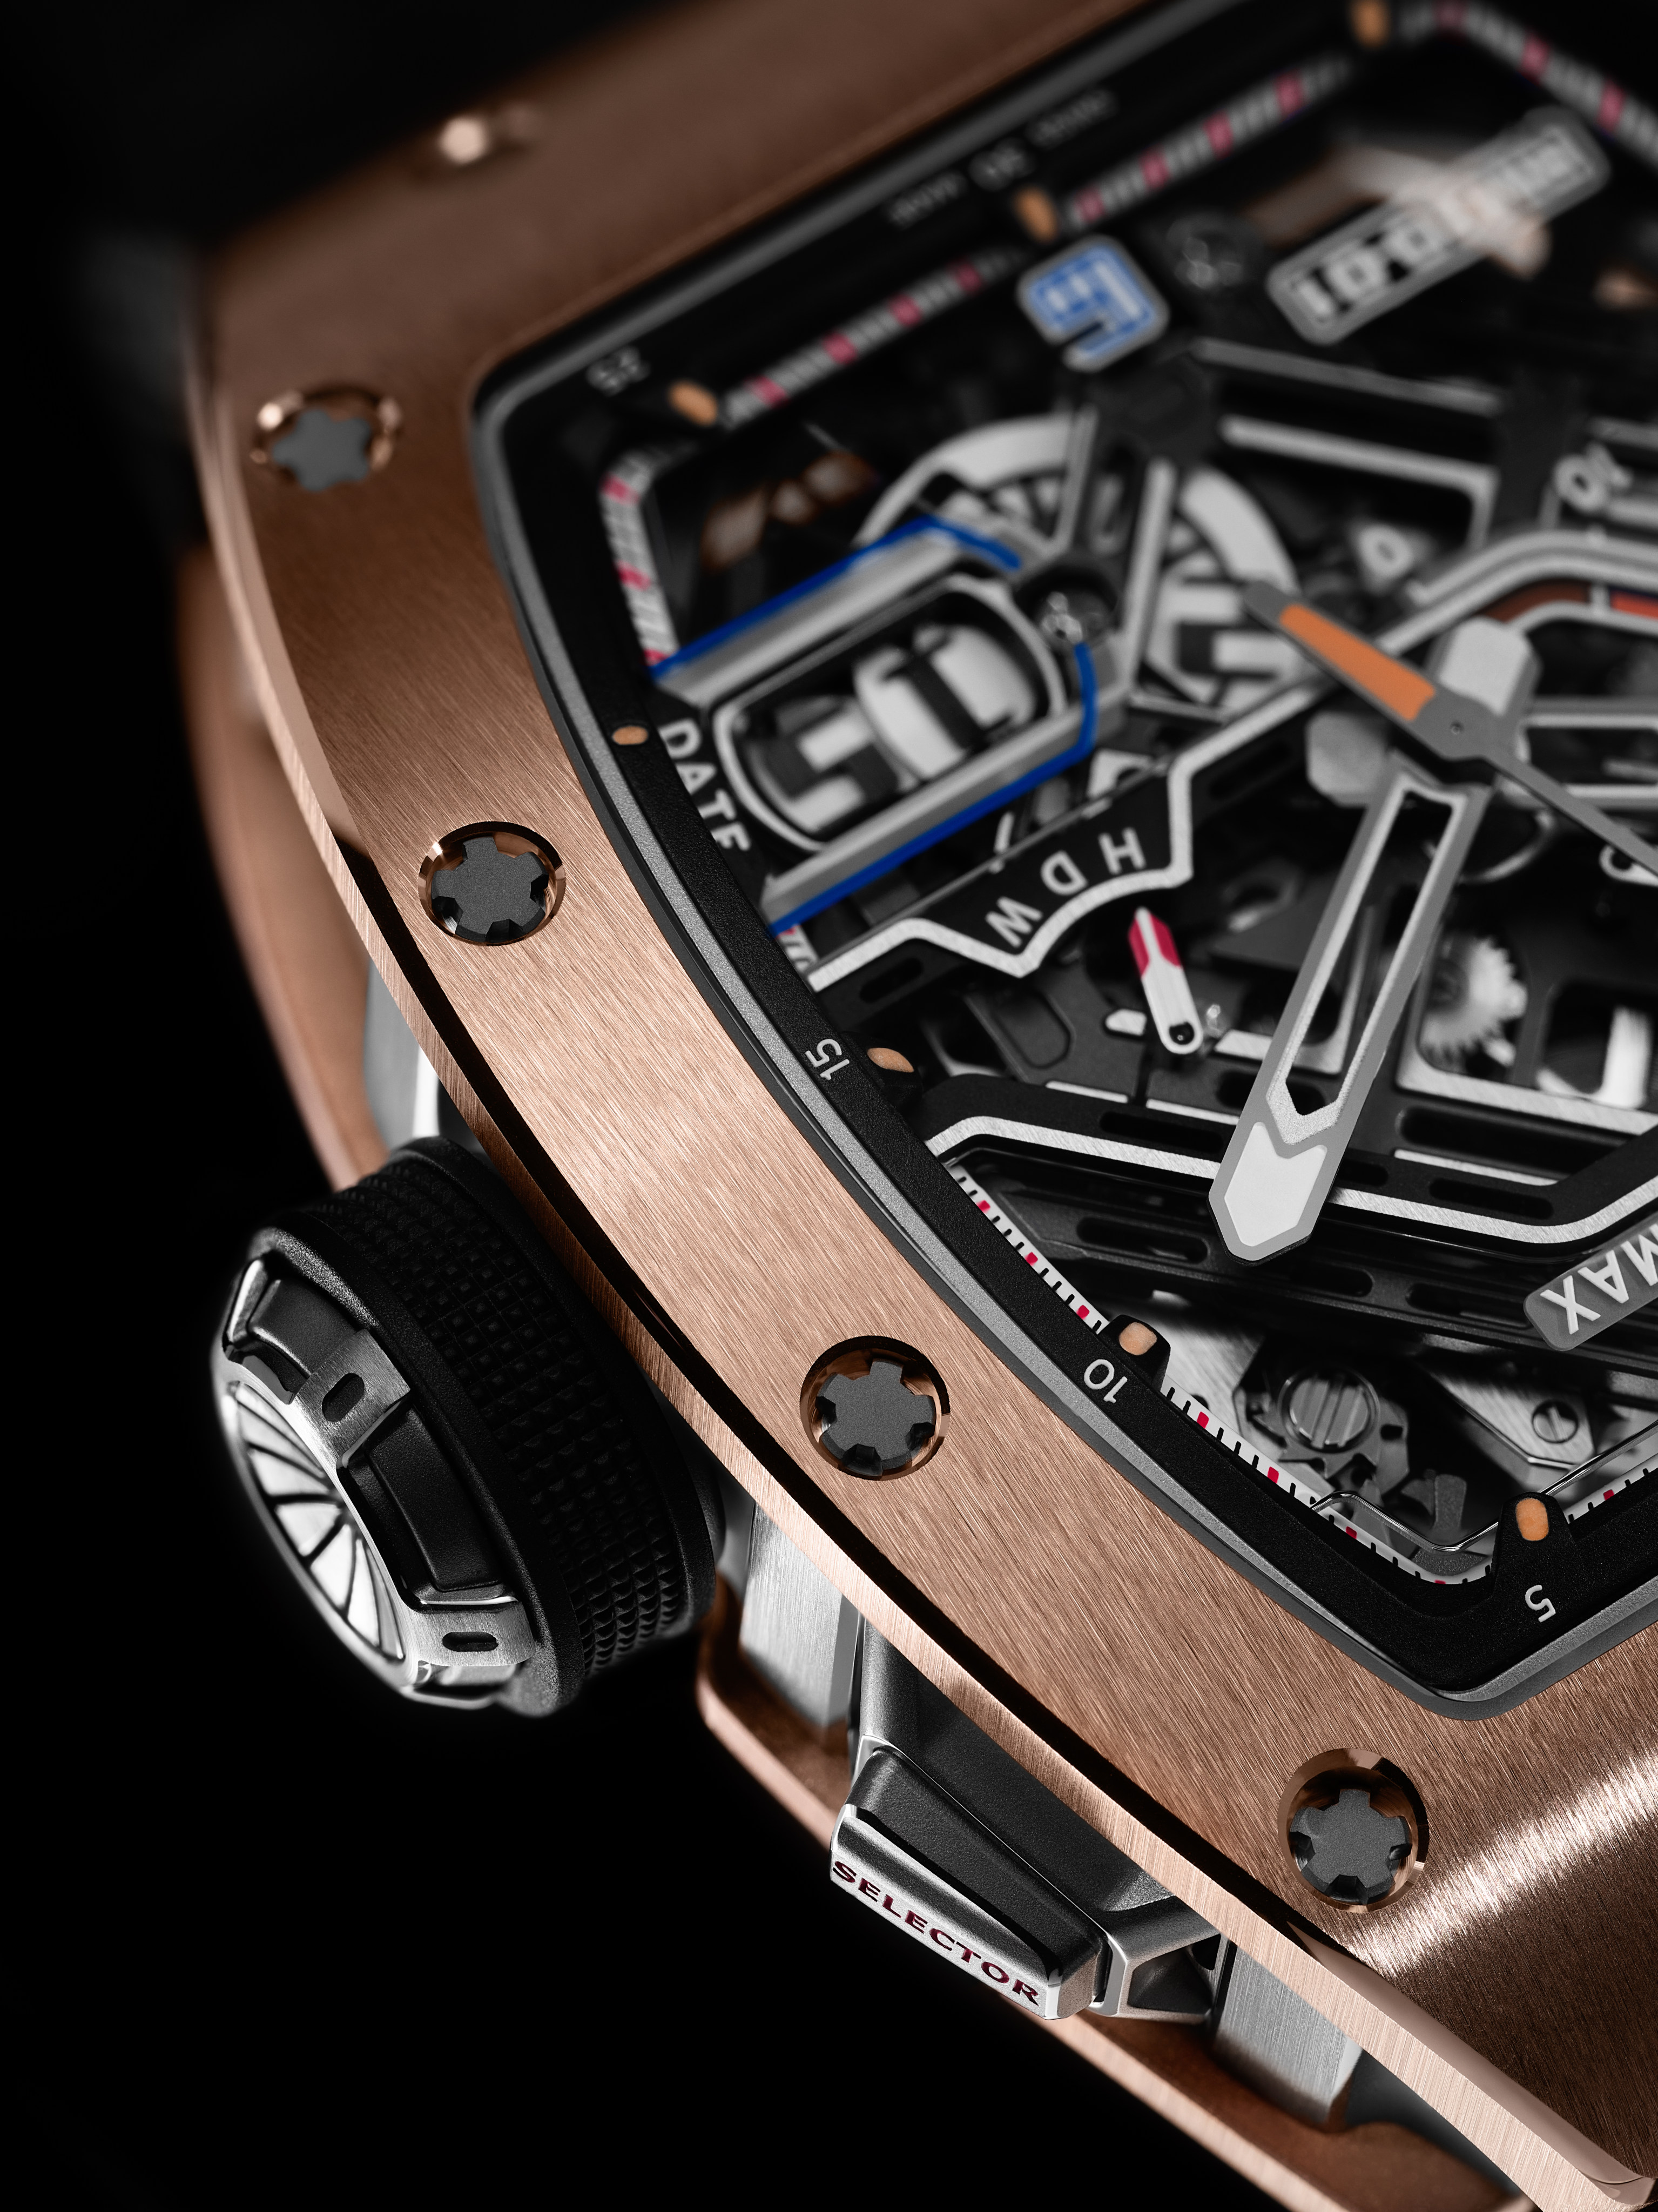 The Richard Mille RM30-01 is powered by the new RMAR2 calibre, which shows off a highly skeletonised design featuring grade 5 titanium bridges and baseplate. Photos: Handout